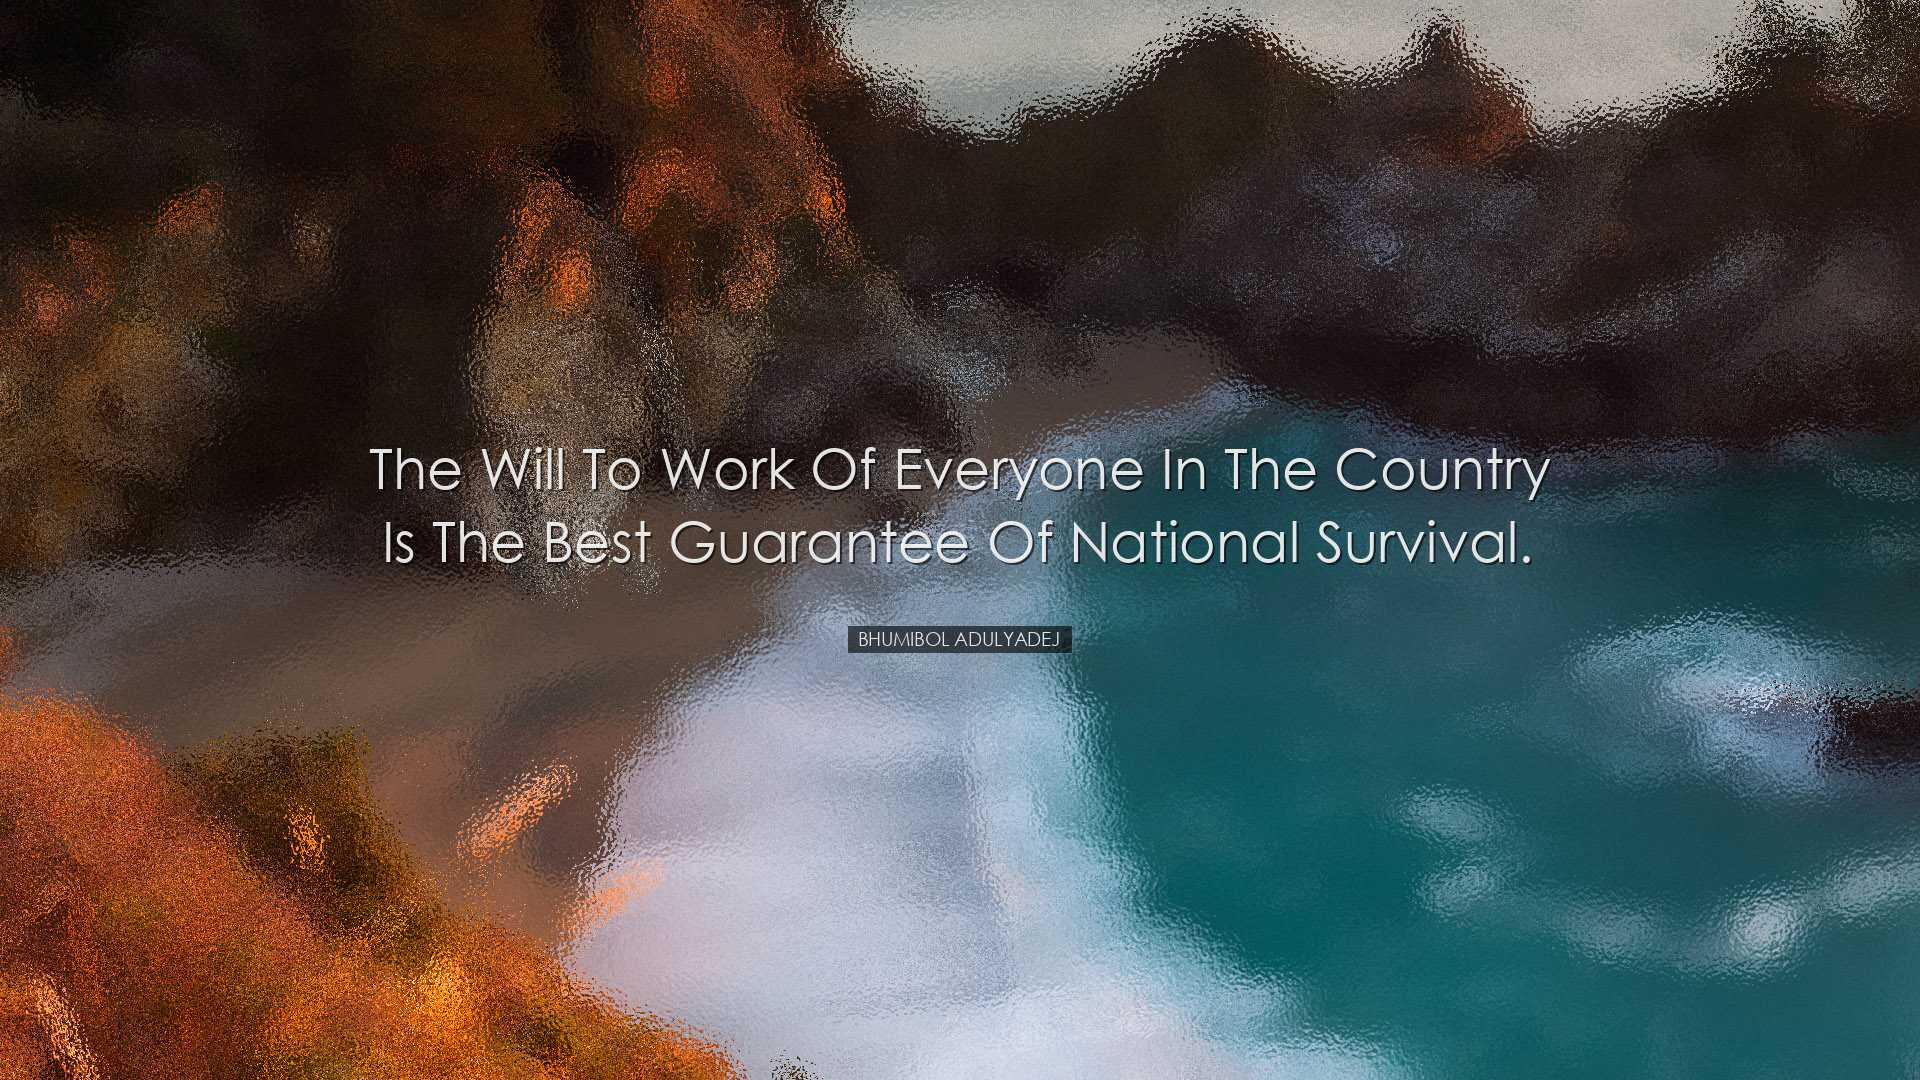 The will to work of everyone in the country is the best guarantee